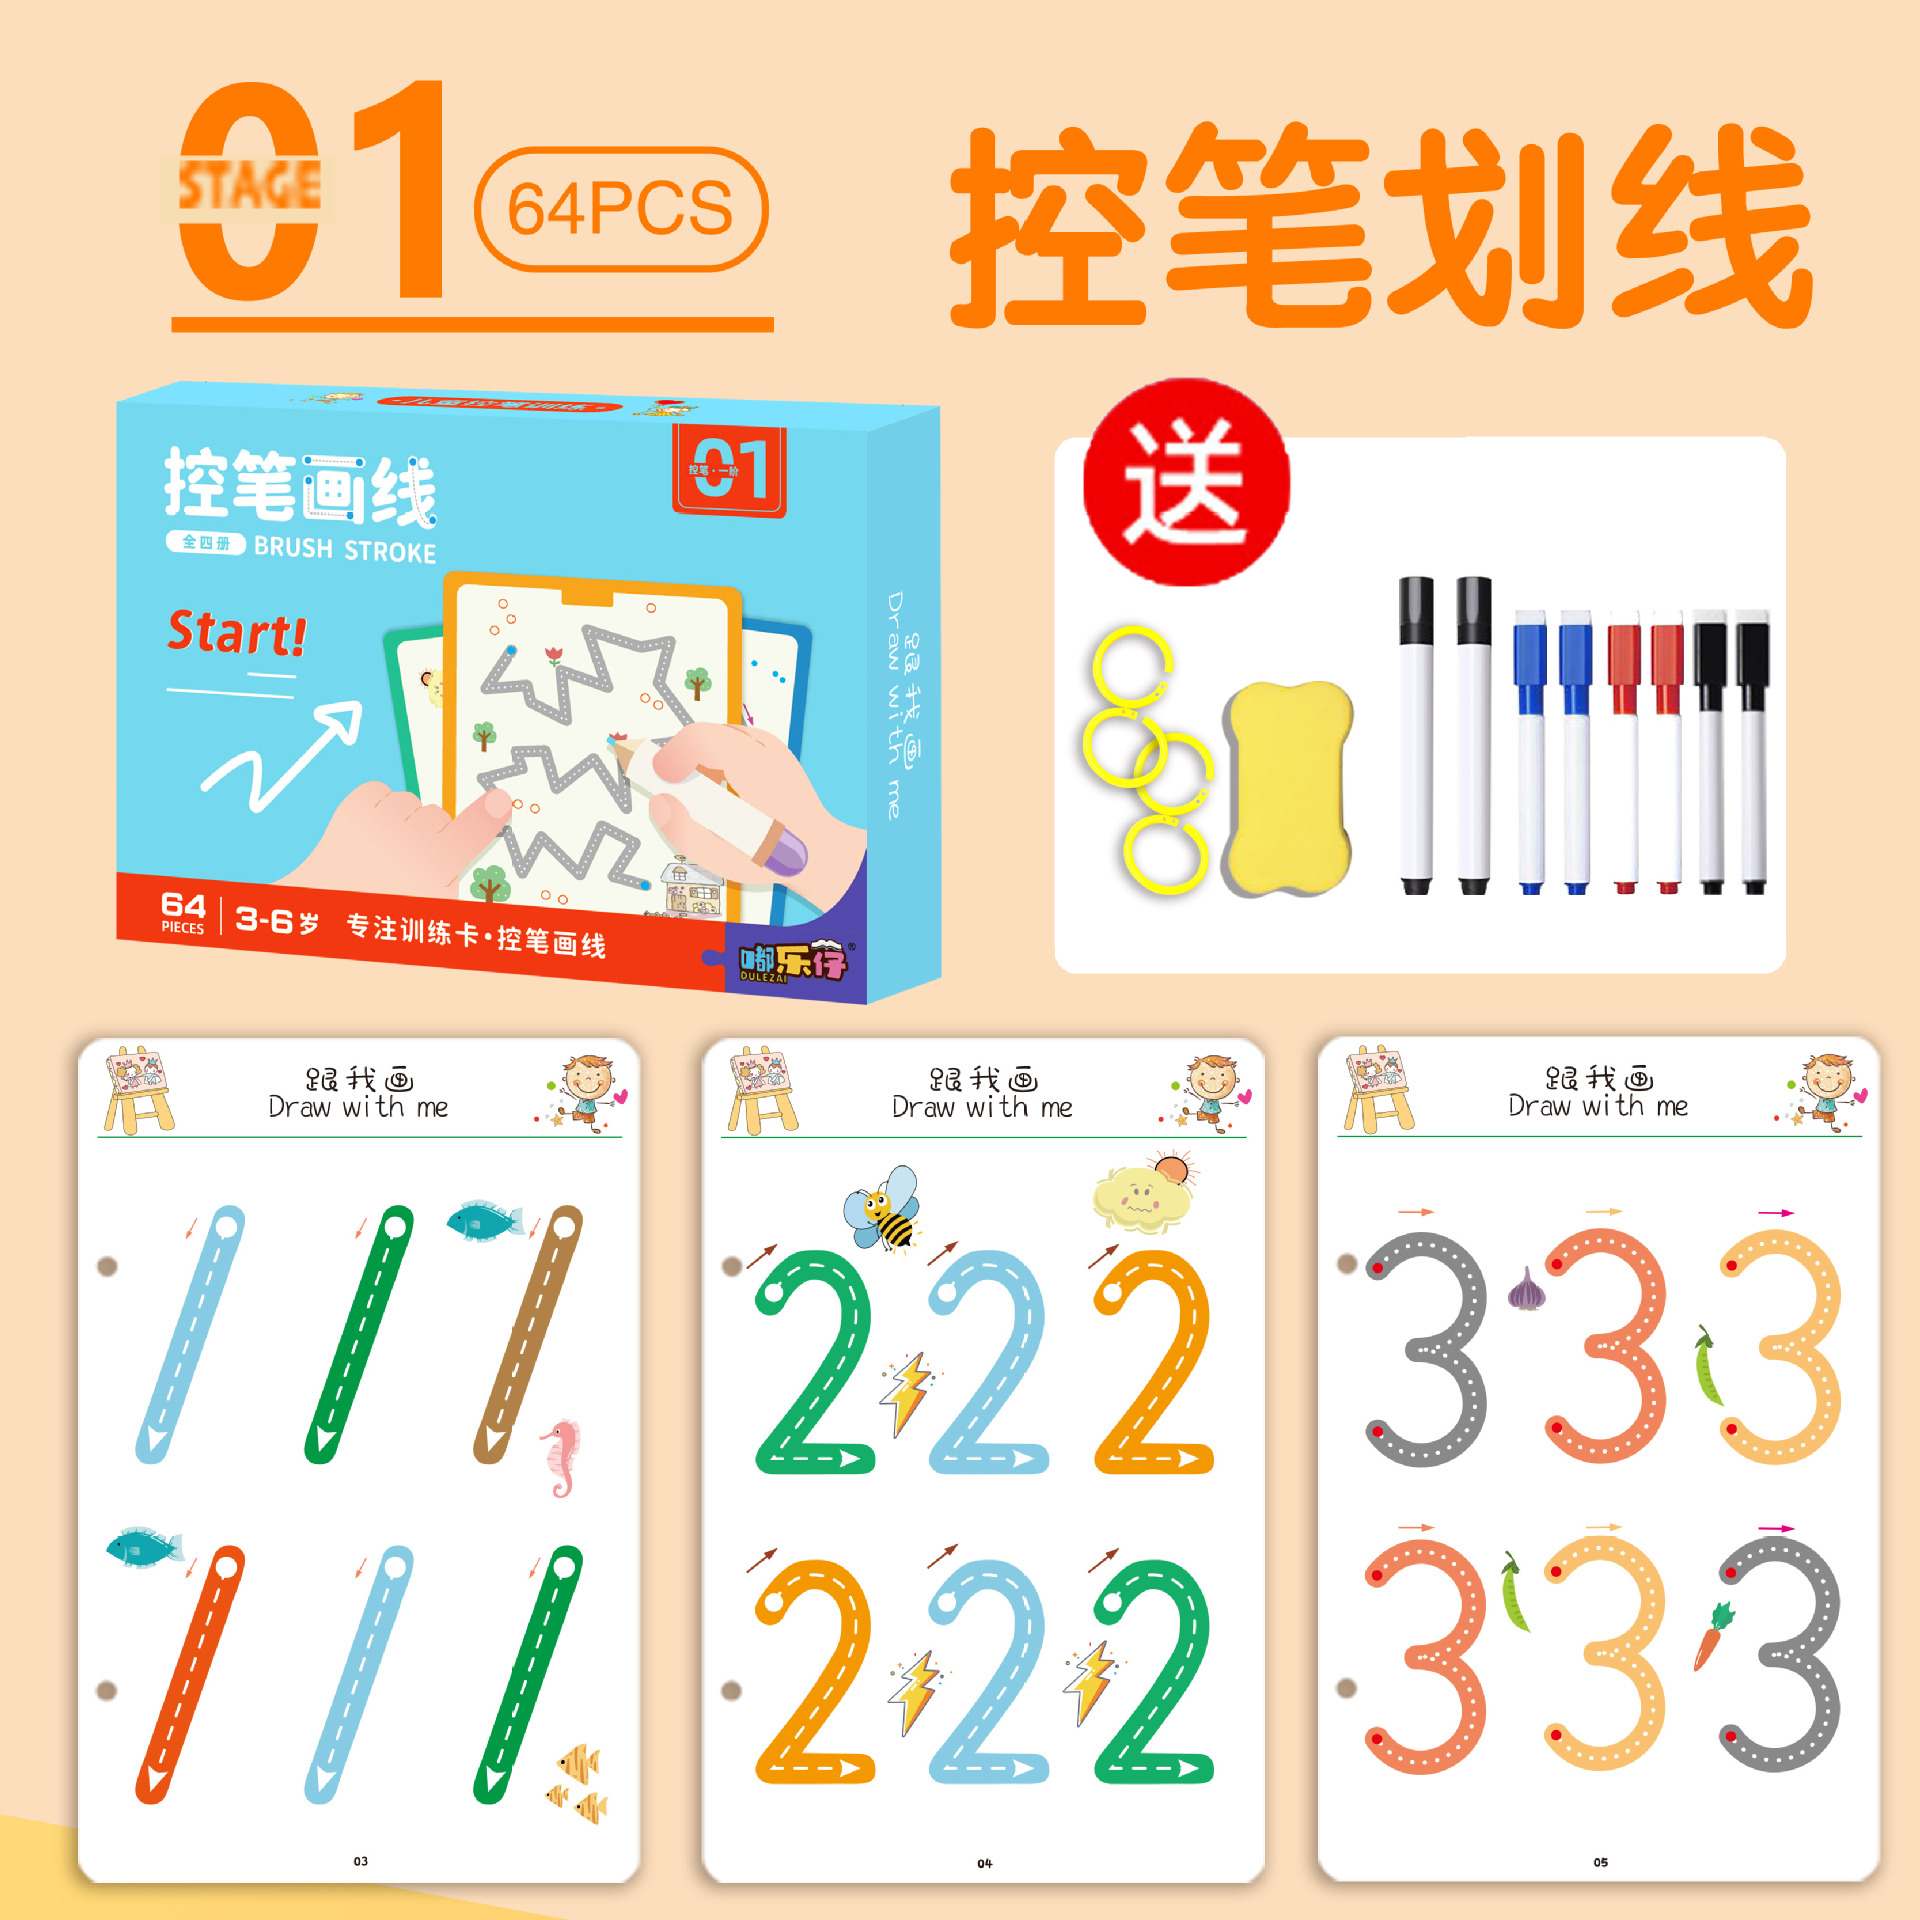 Du Lezai Advanced Logical Thinking Enlightenment Training Card Children's Early Childhood Education Pen Control Training Maze Early Learning Card